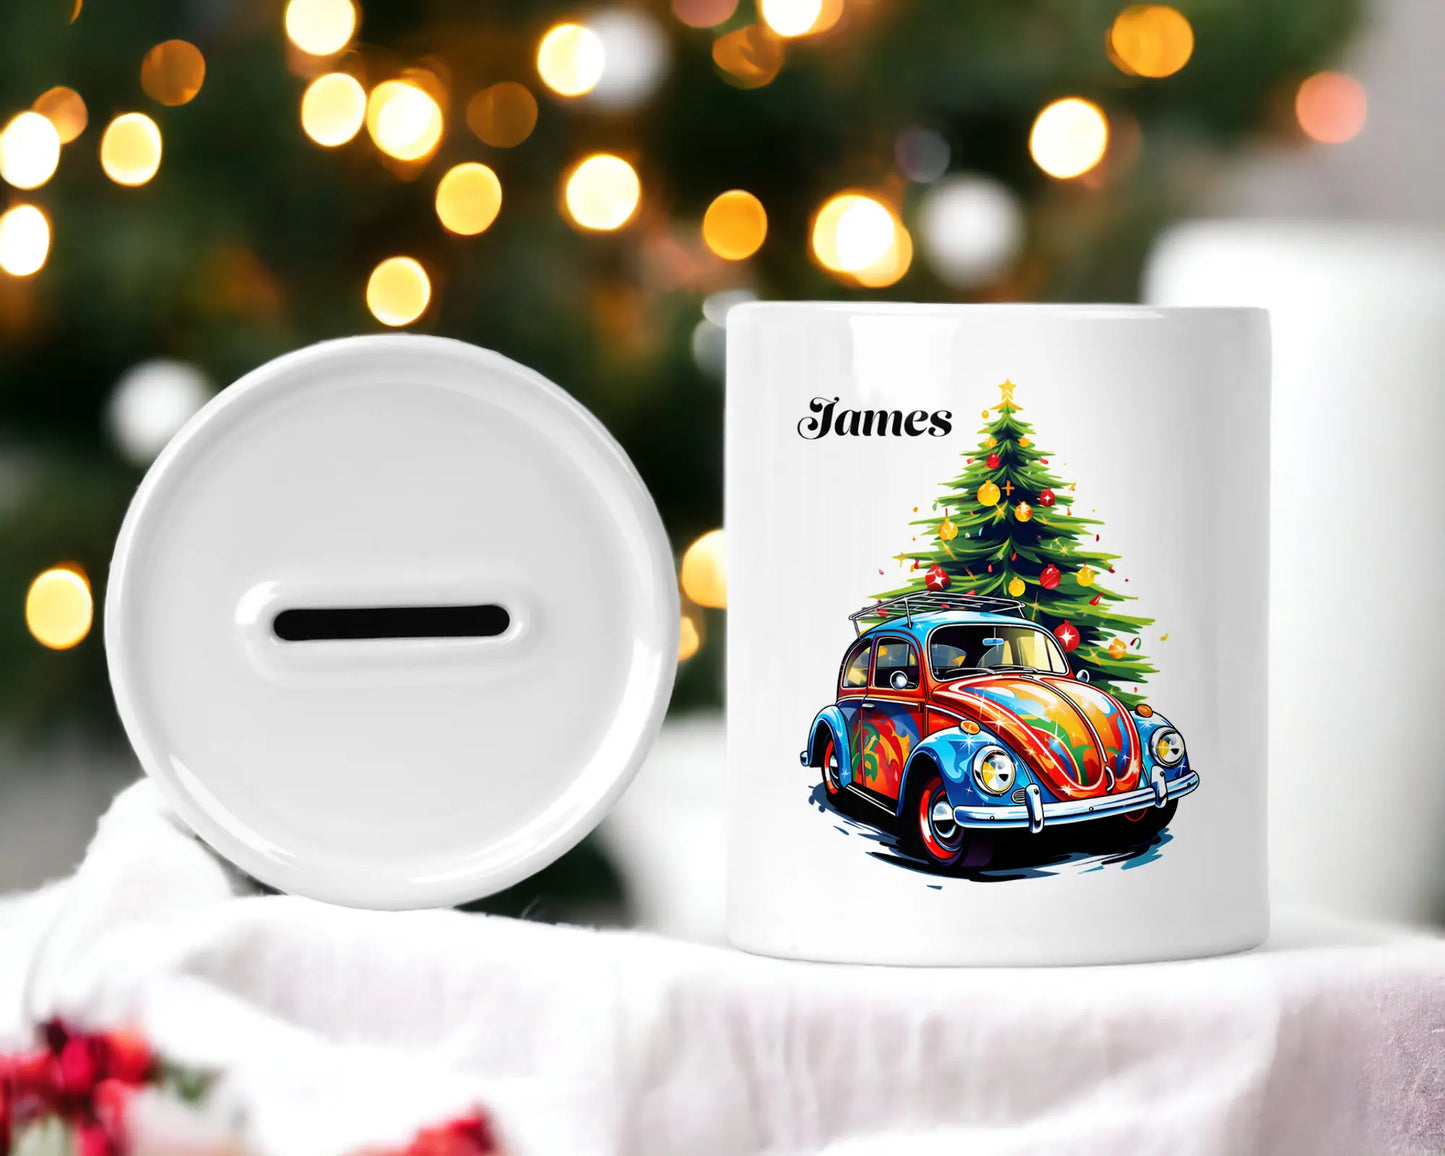  Personalised Christmas Tree & Vintage Beetle Money Box - Free Shipping by Free Spirit Accessories sold by Free Spirit Accessories